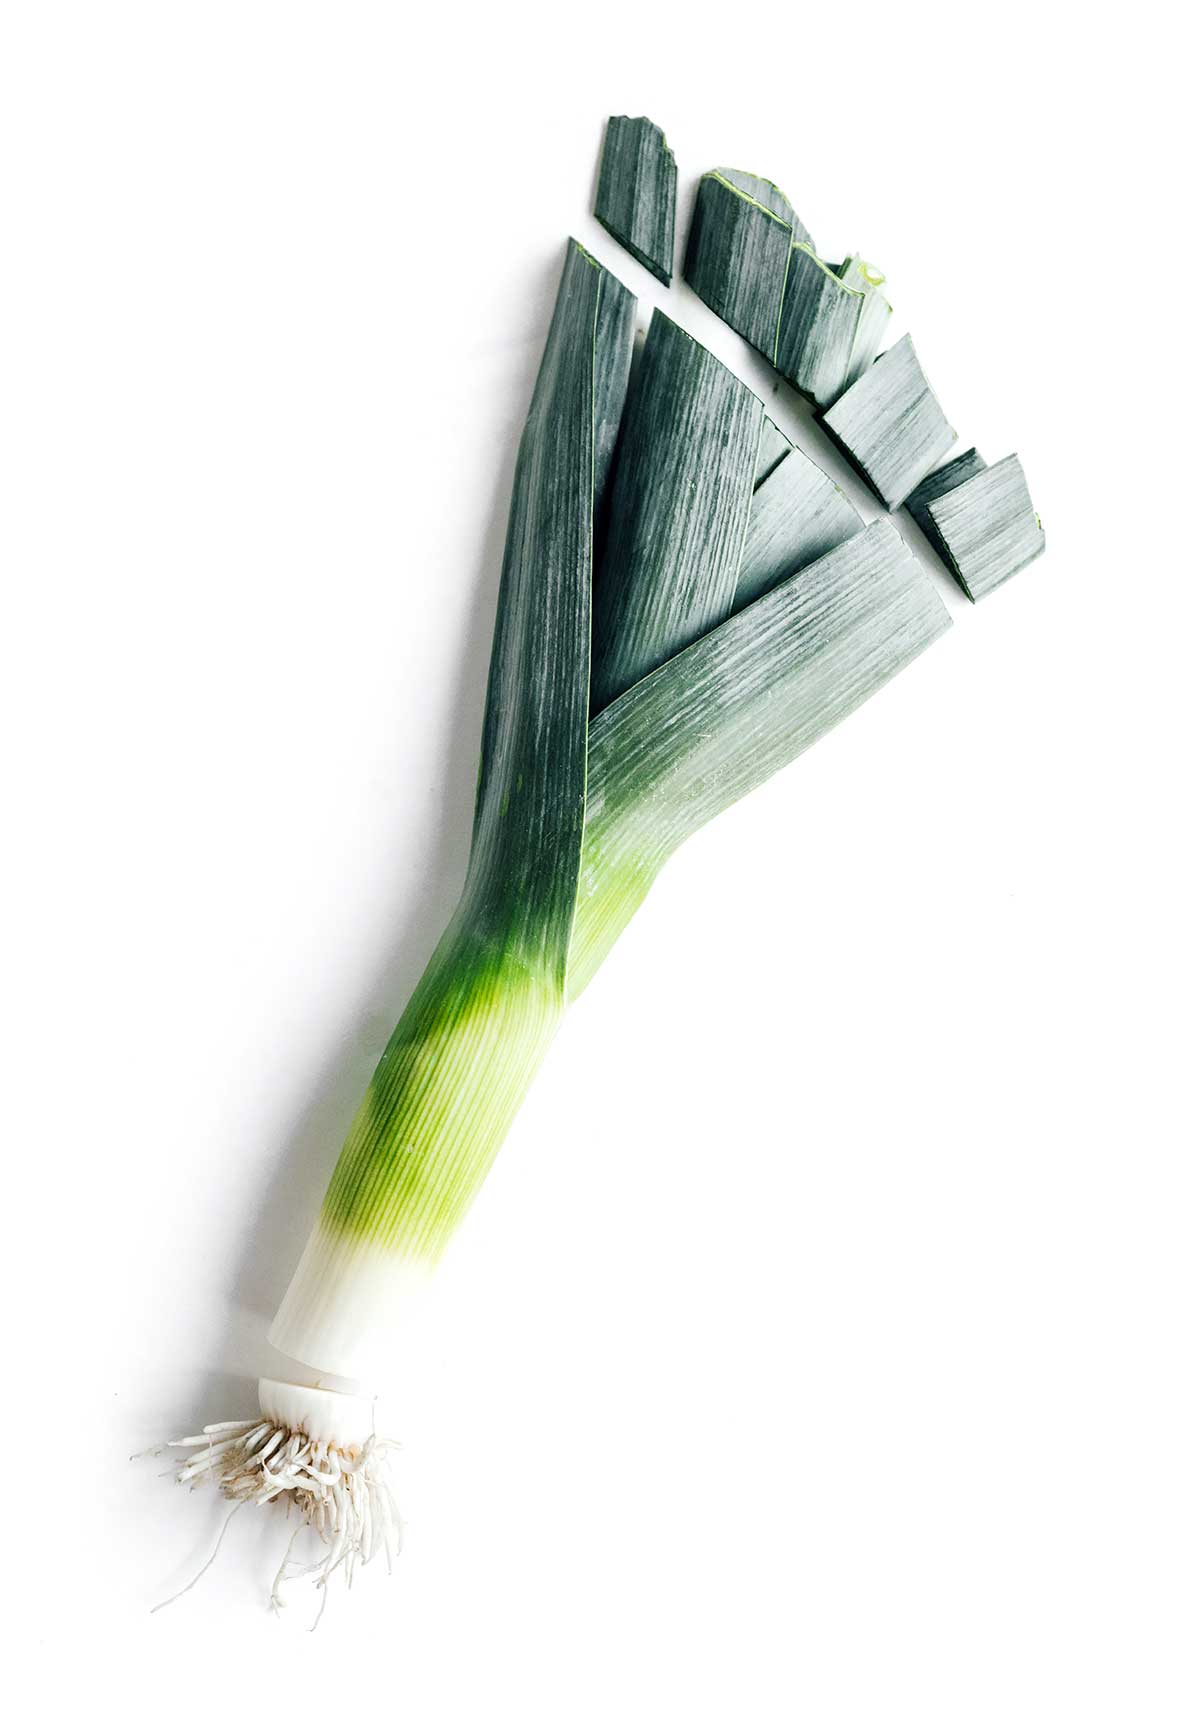 A leek on a white background with the ends cut off, detailing how to cut a leek